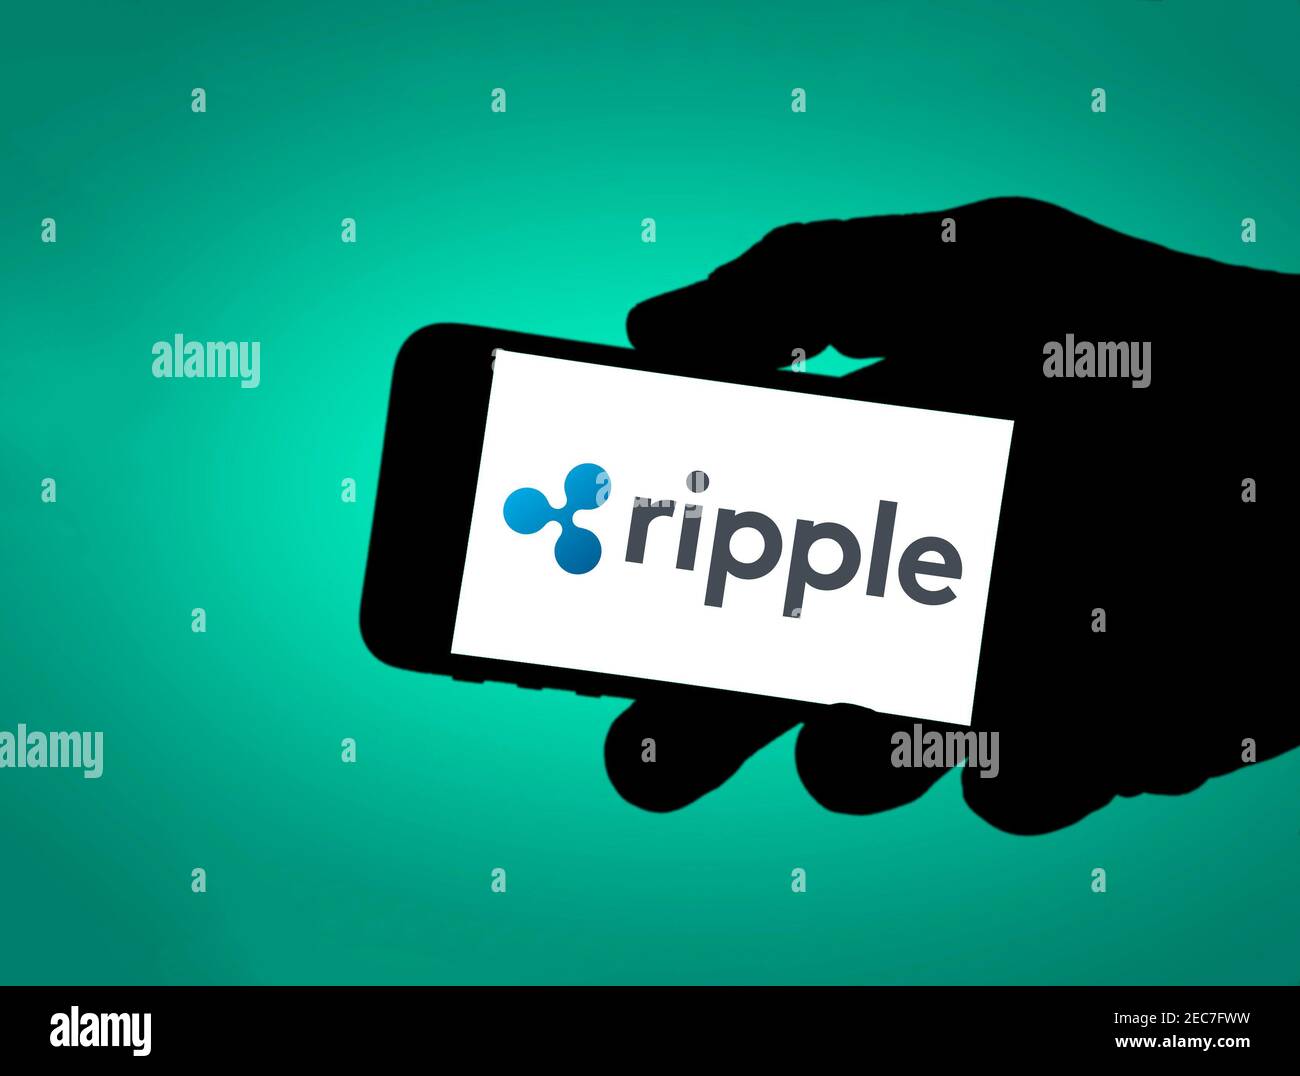 Ripple Labs logo on mobile device Stock Photo